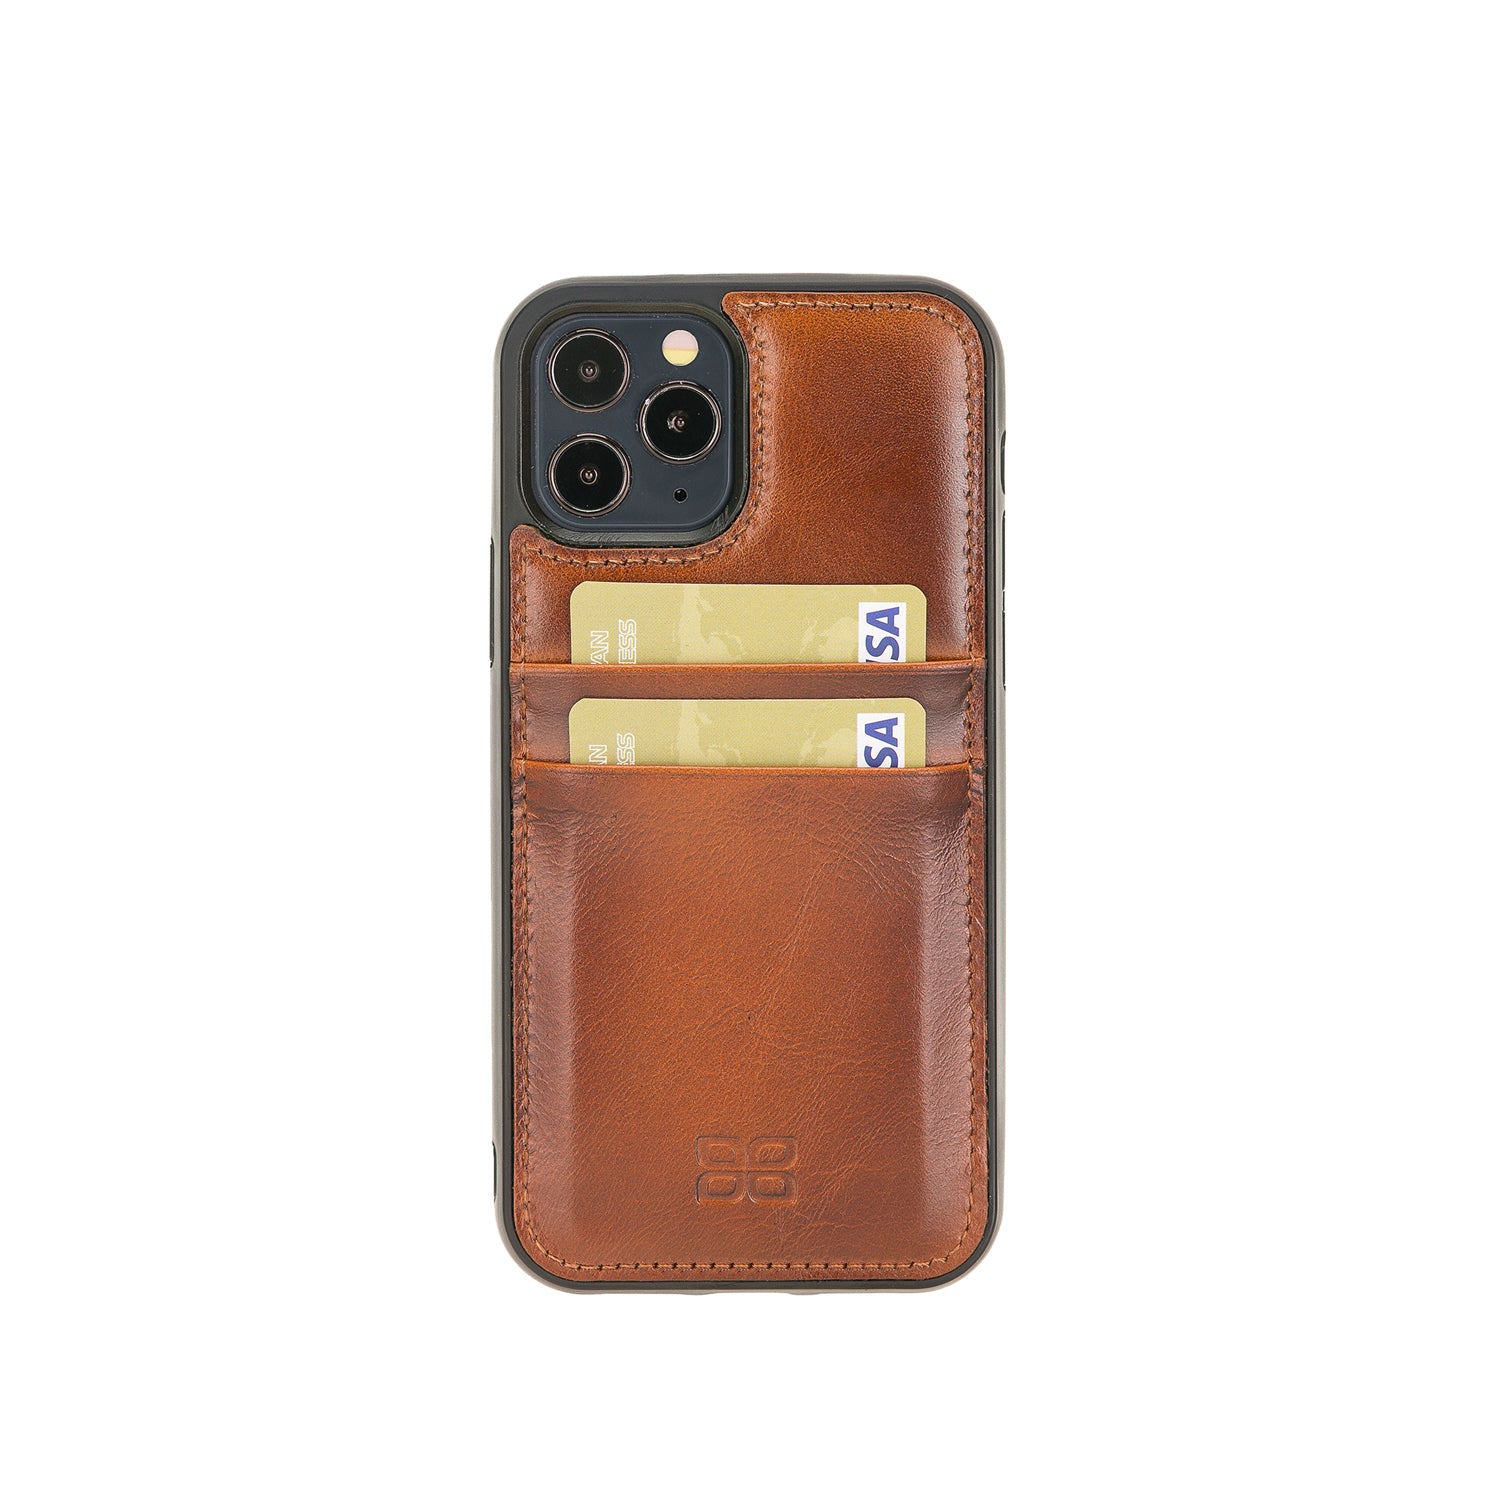 Flex Cover Leather Back Case with Card Holder for iPhone 12 Pro Max (6.7") - EFFECT BROWN - saracleather